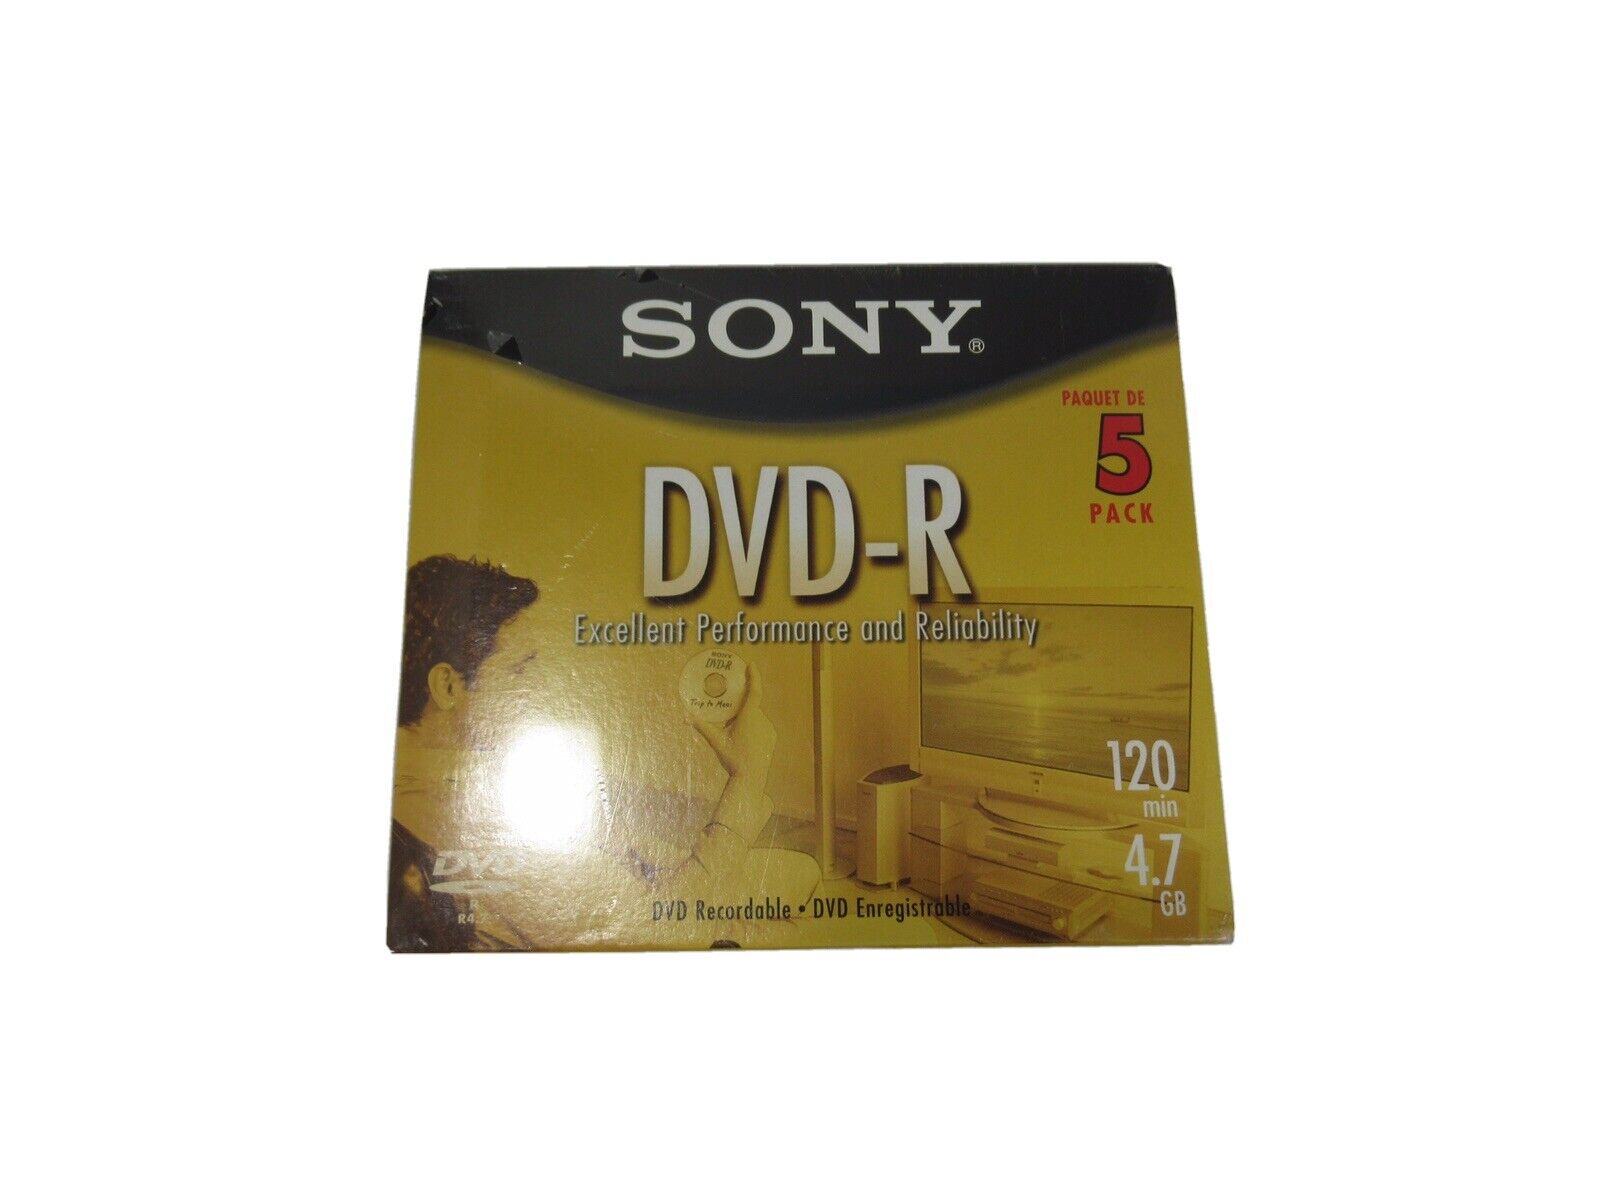 Sony DVD-R 5 Pack 120 Min. 4.7GB New Fast Shipping